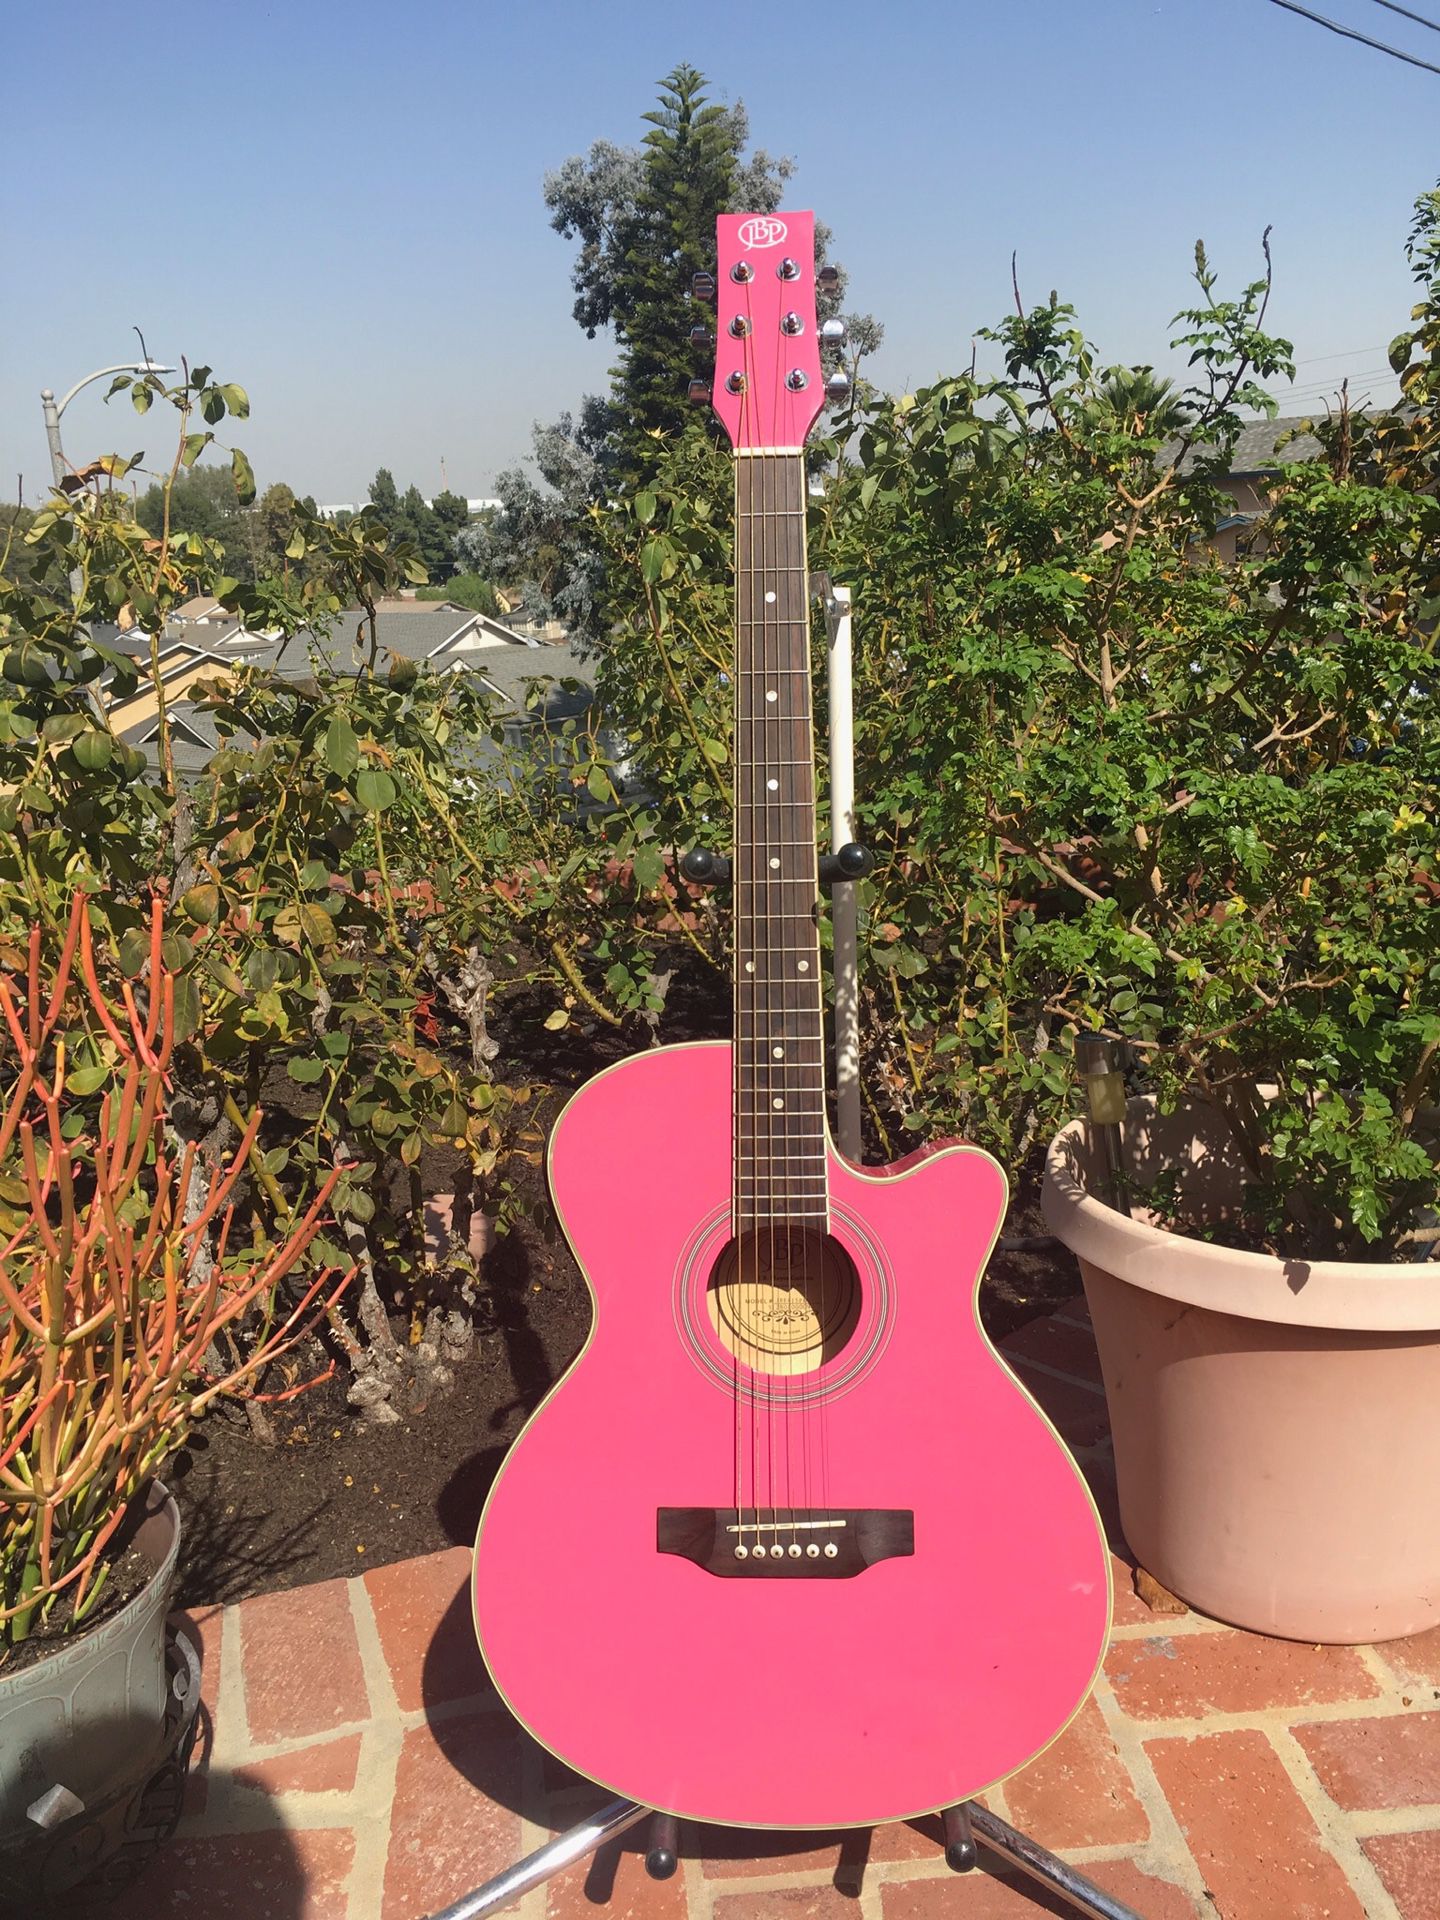 JB Player electric acoustic guitar